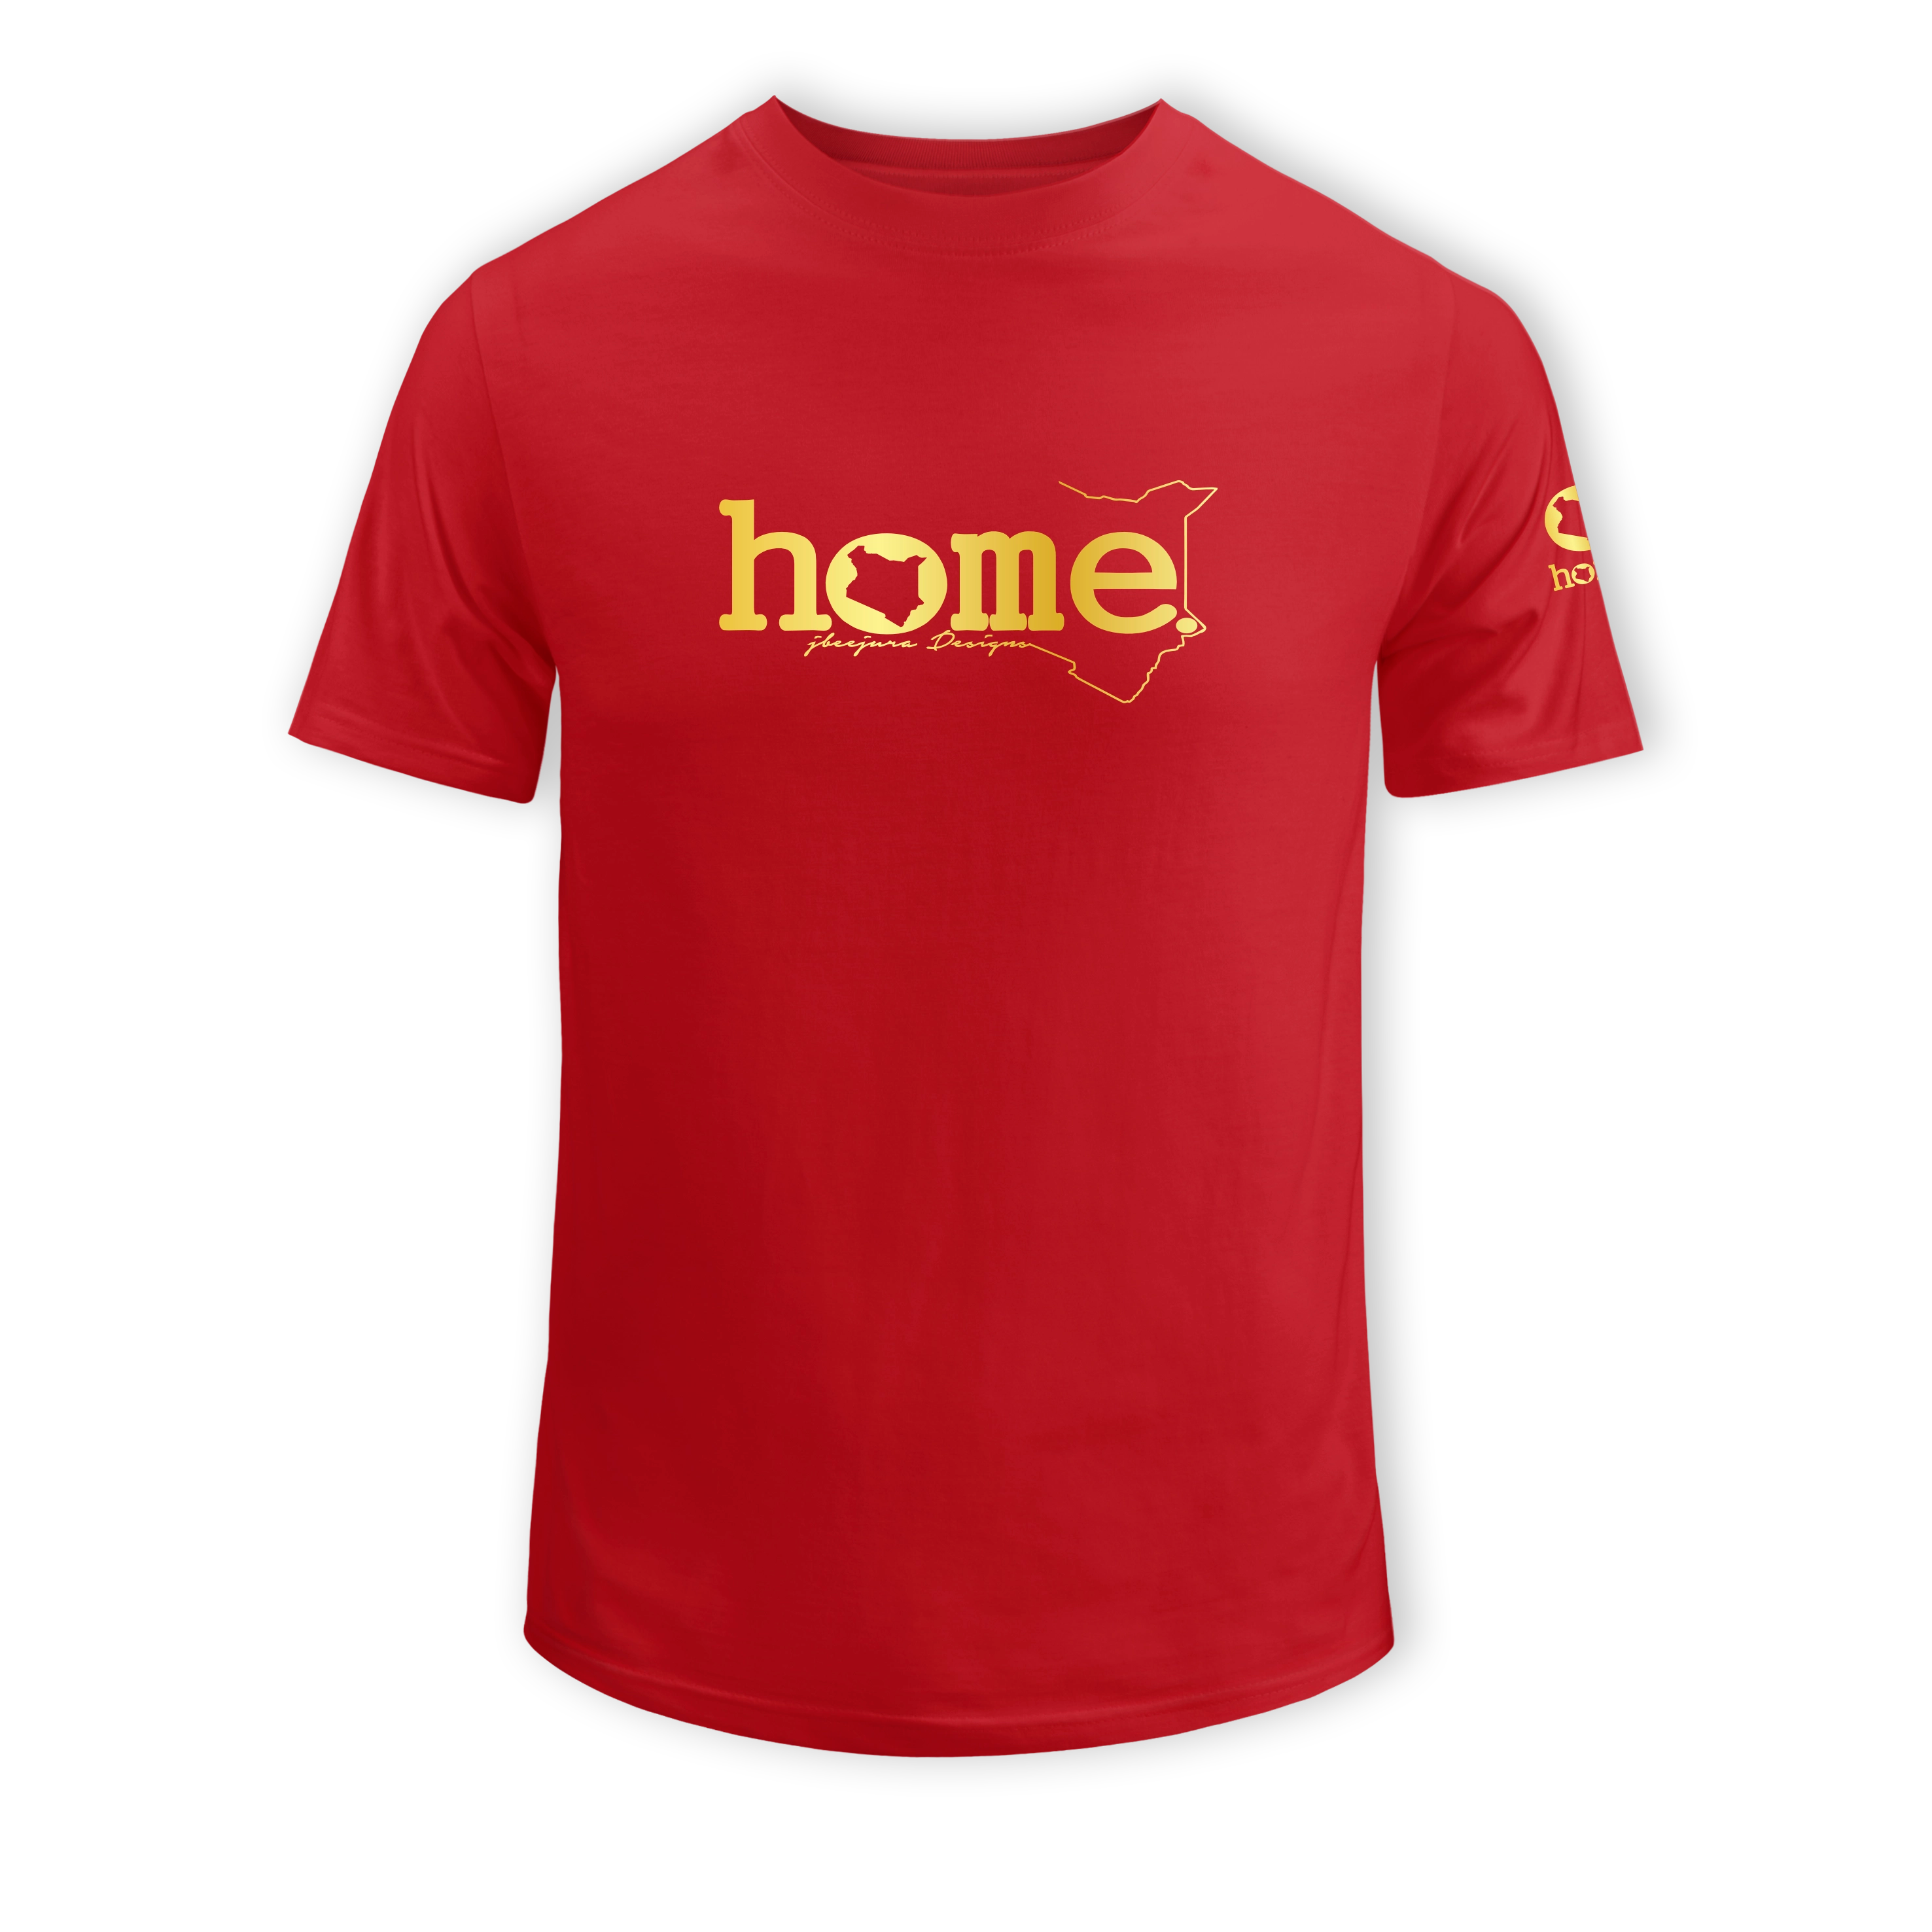 home_254 SHORT-SLEEVED RED T-SHIRT WITH A GOLD CLASSIC WORDS PRINT – COTTON PLUS FABRIC